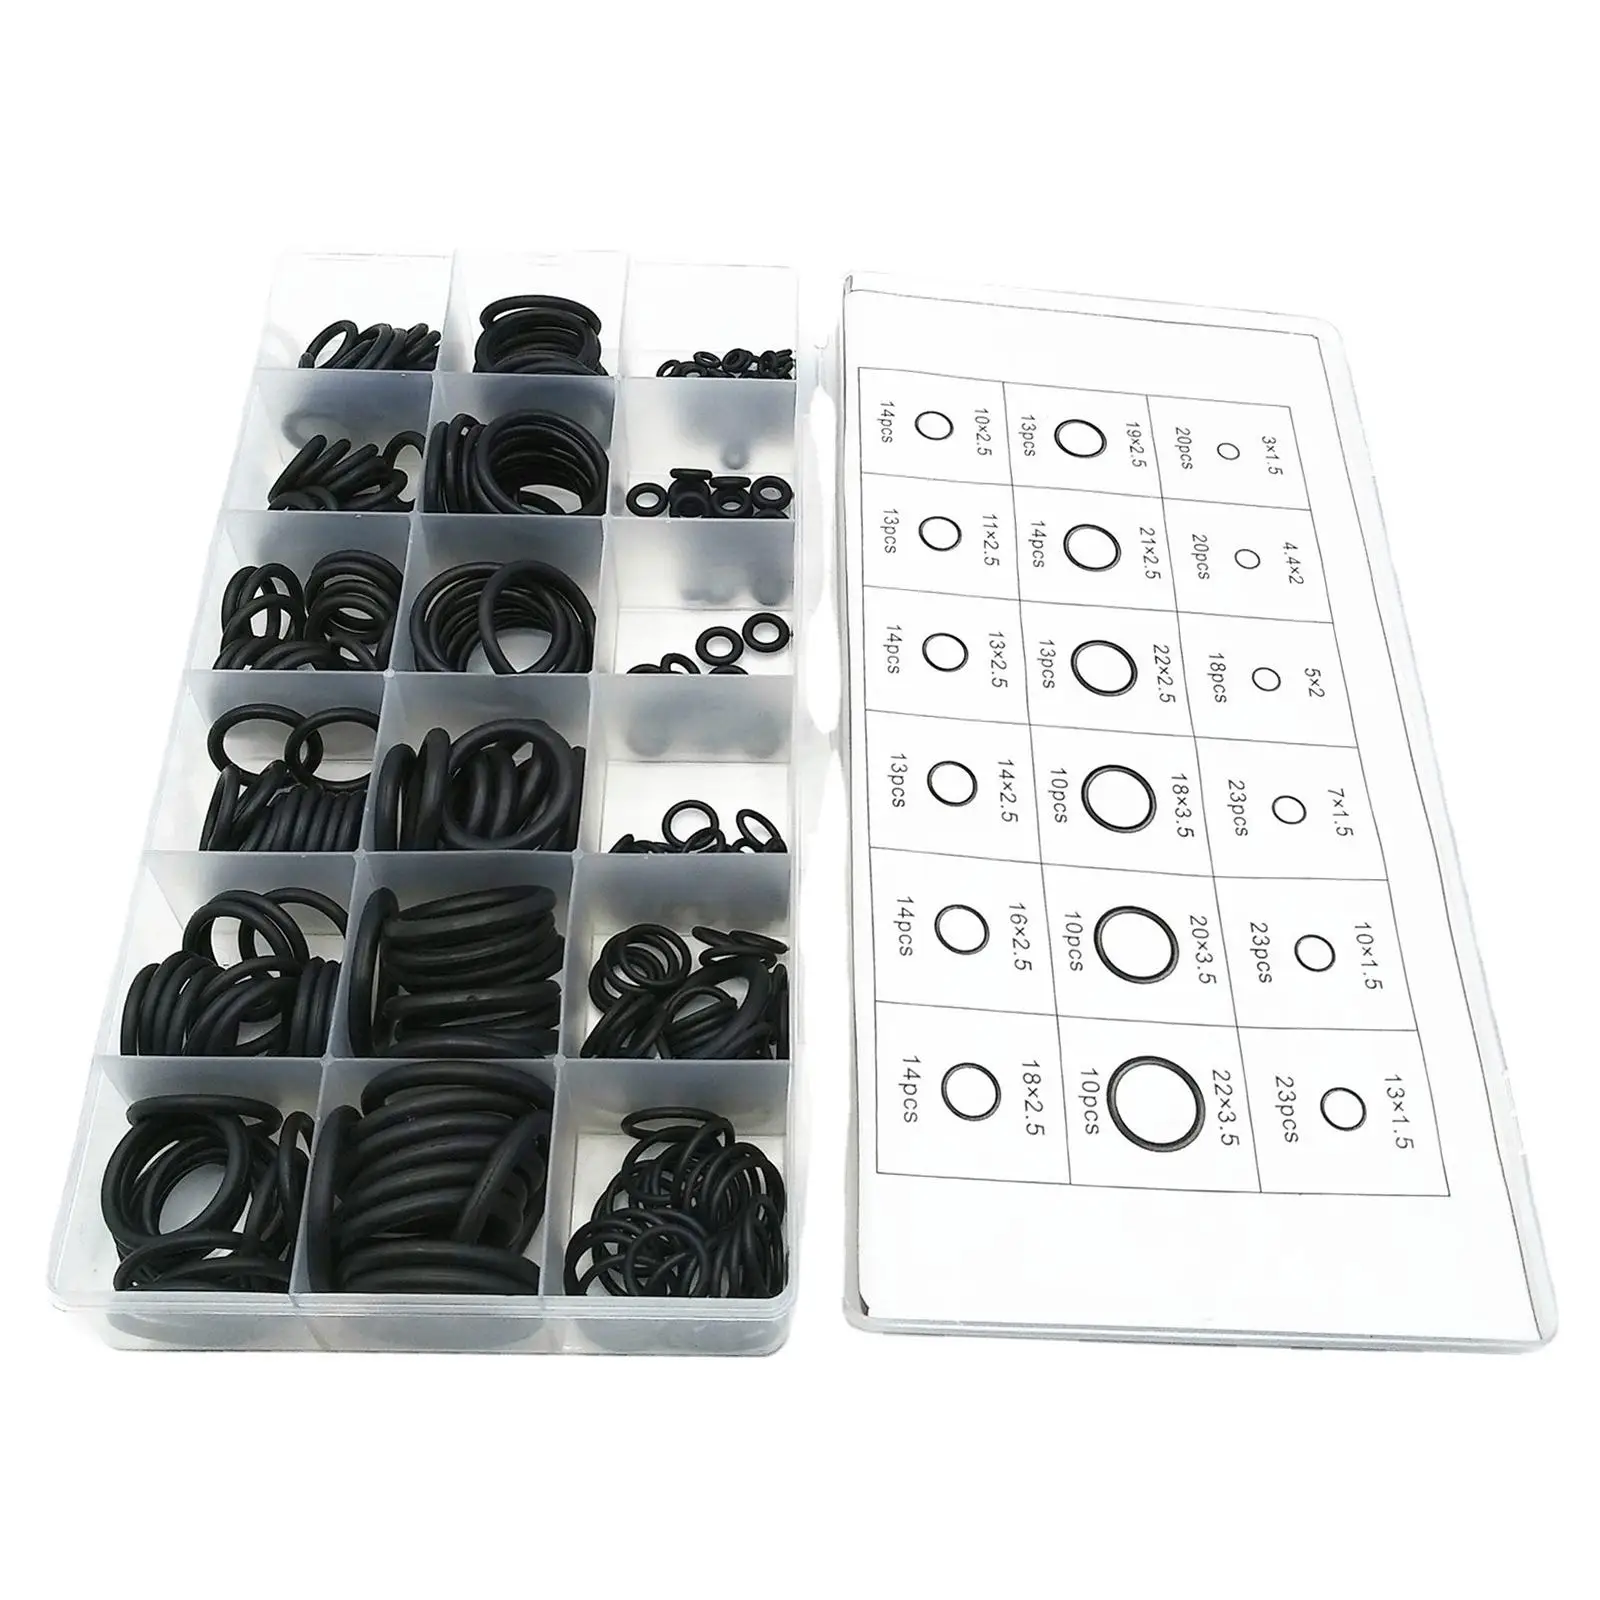 279Pcs O Ring Assortment Set 18 Different Sizes Assorted Sealing Washer Black Small Round for Car Auto Repairing Plumbers